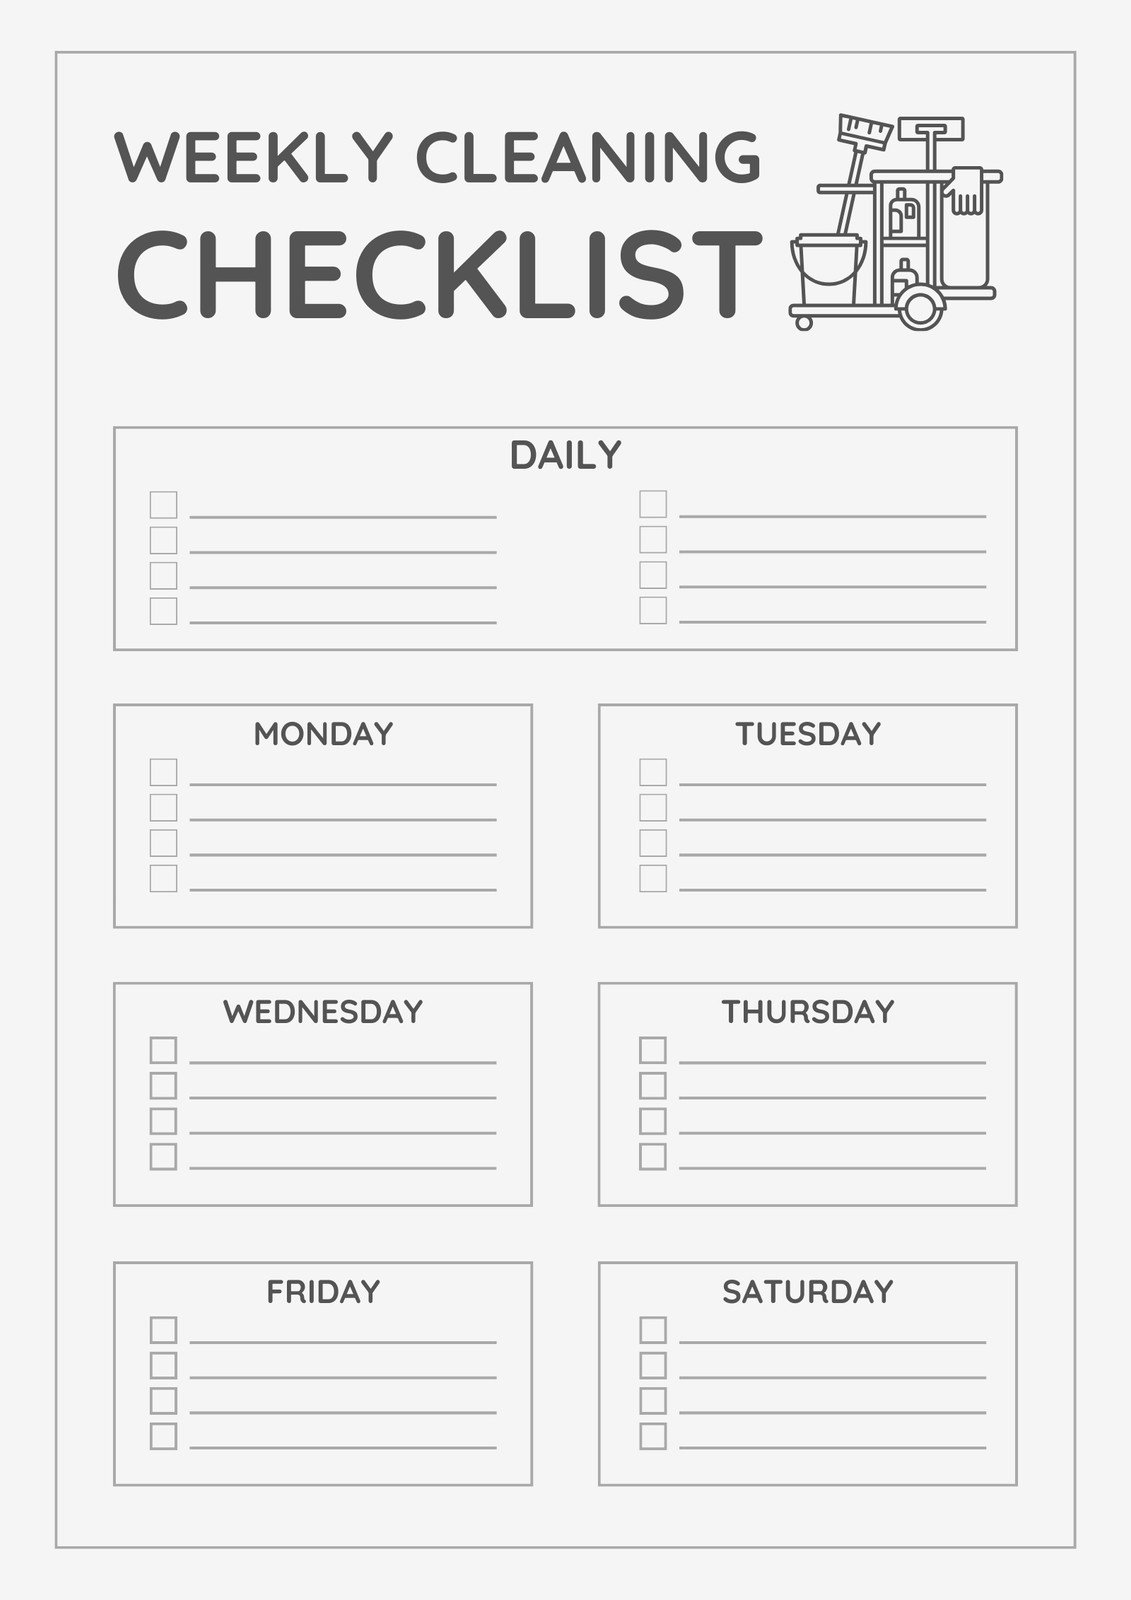 First Home Essentials Checklist - Fill and Sign Printable Template Online